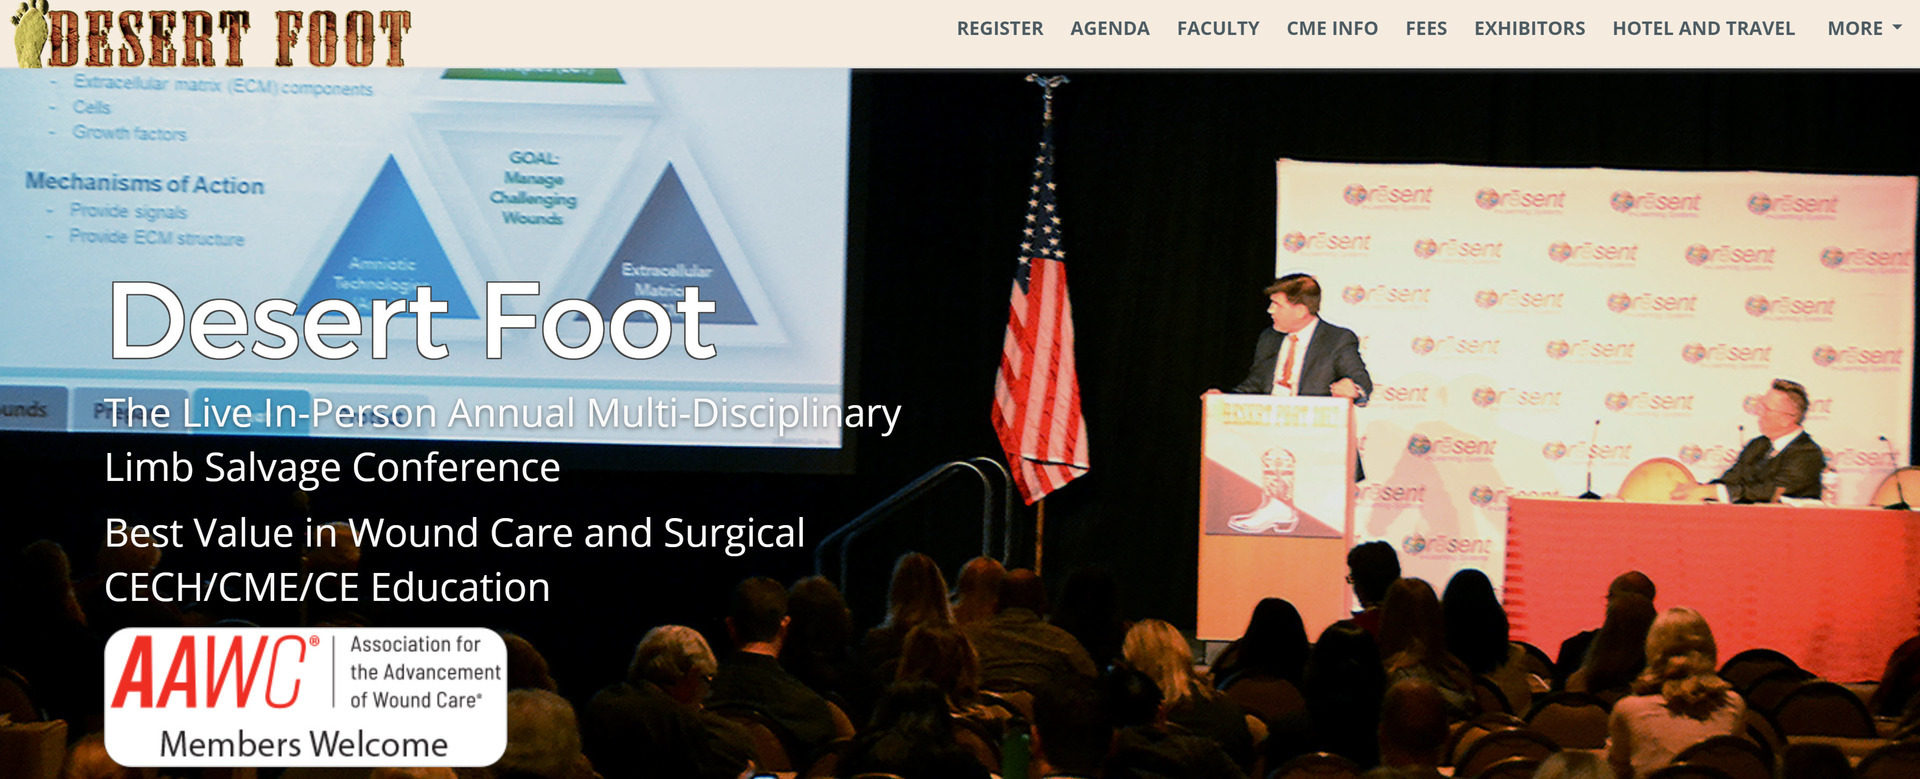 Desert Foot Limb Salvage and Medical Surgical Podiatry Wound Care Conference 2022, Phoenix, Arizona, United States